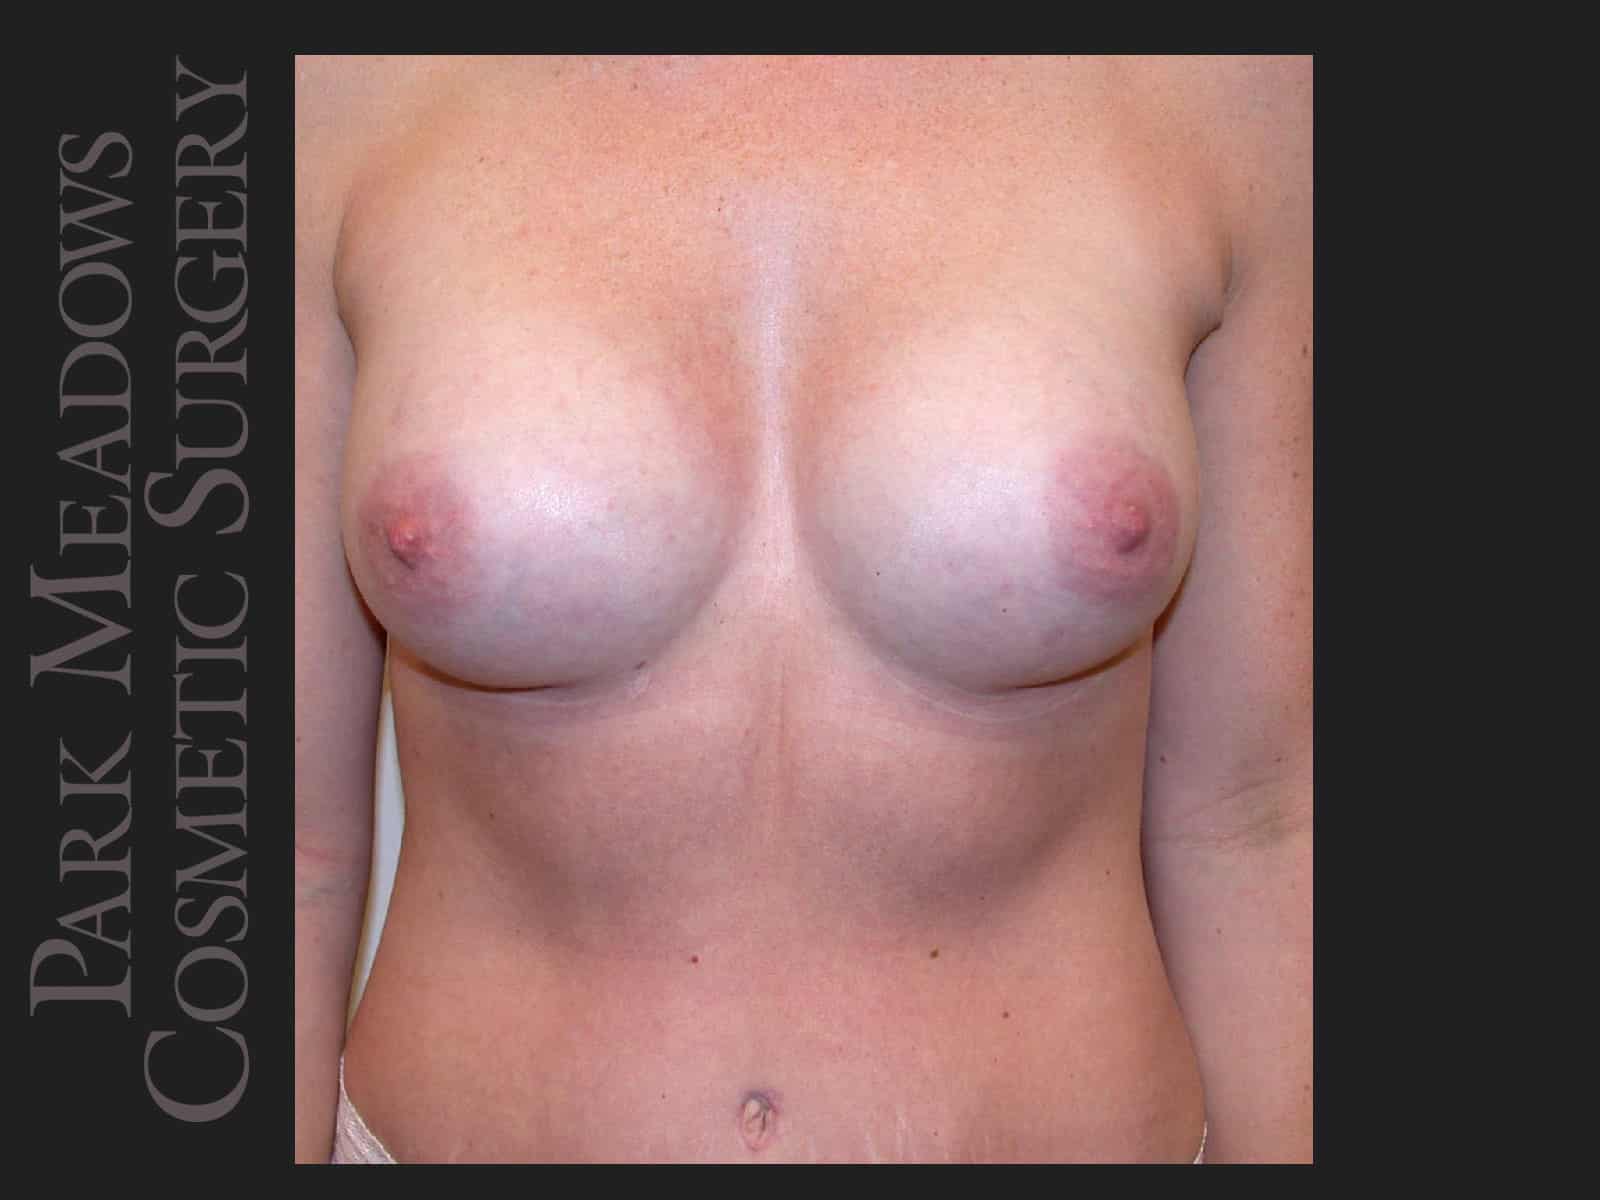 Saline Breast Augmention; 250cc implants filled to 300cc